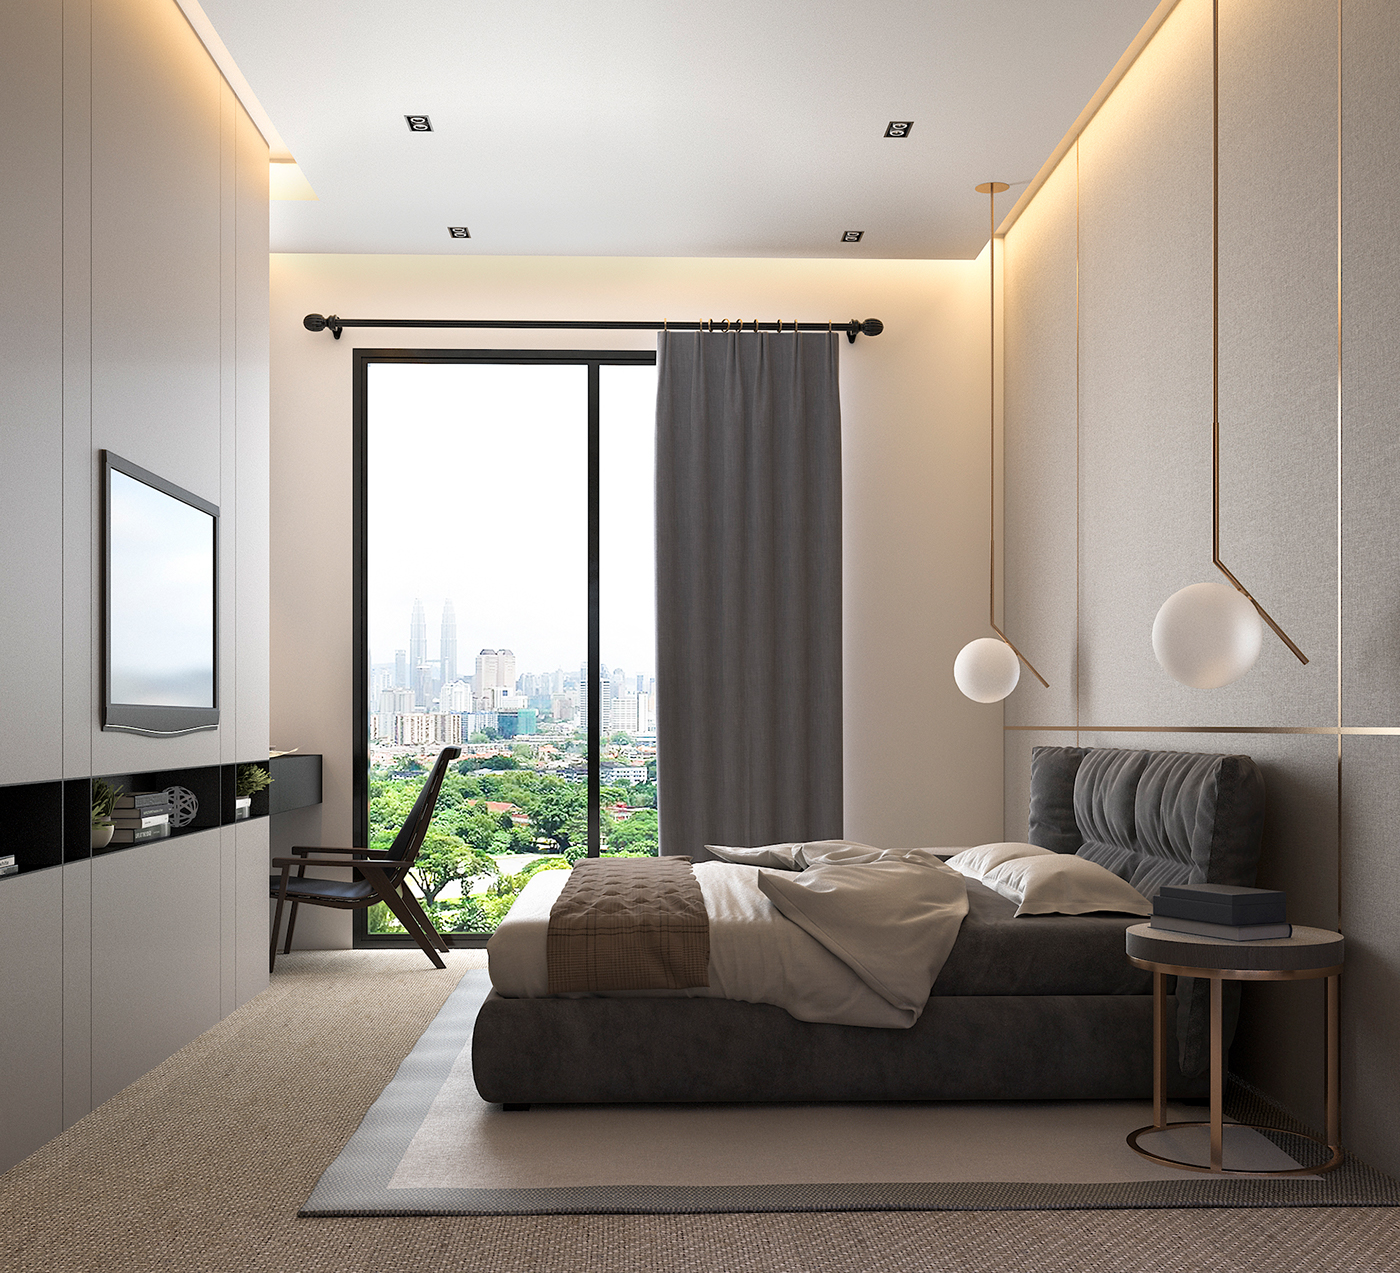 3D Interior Bedroom and WC Scenes File 3dsmax Free Download